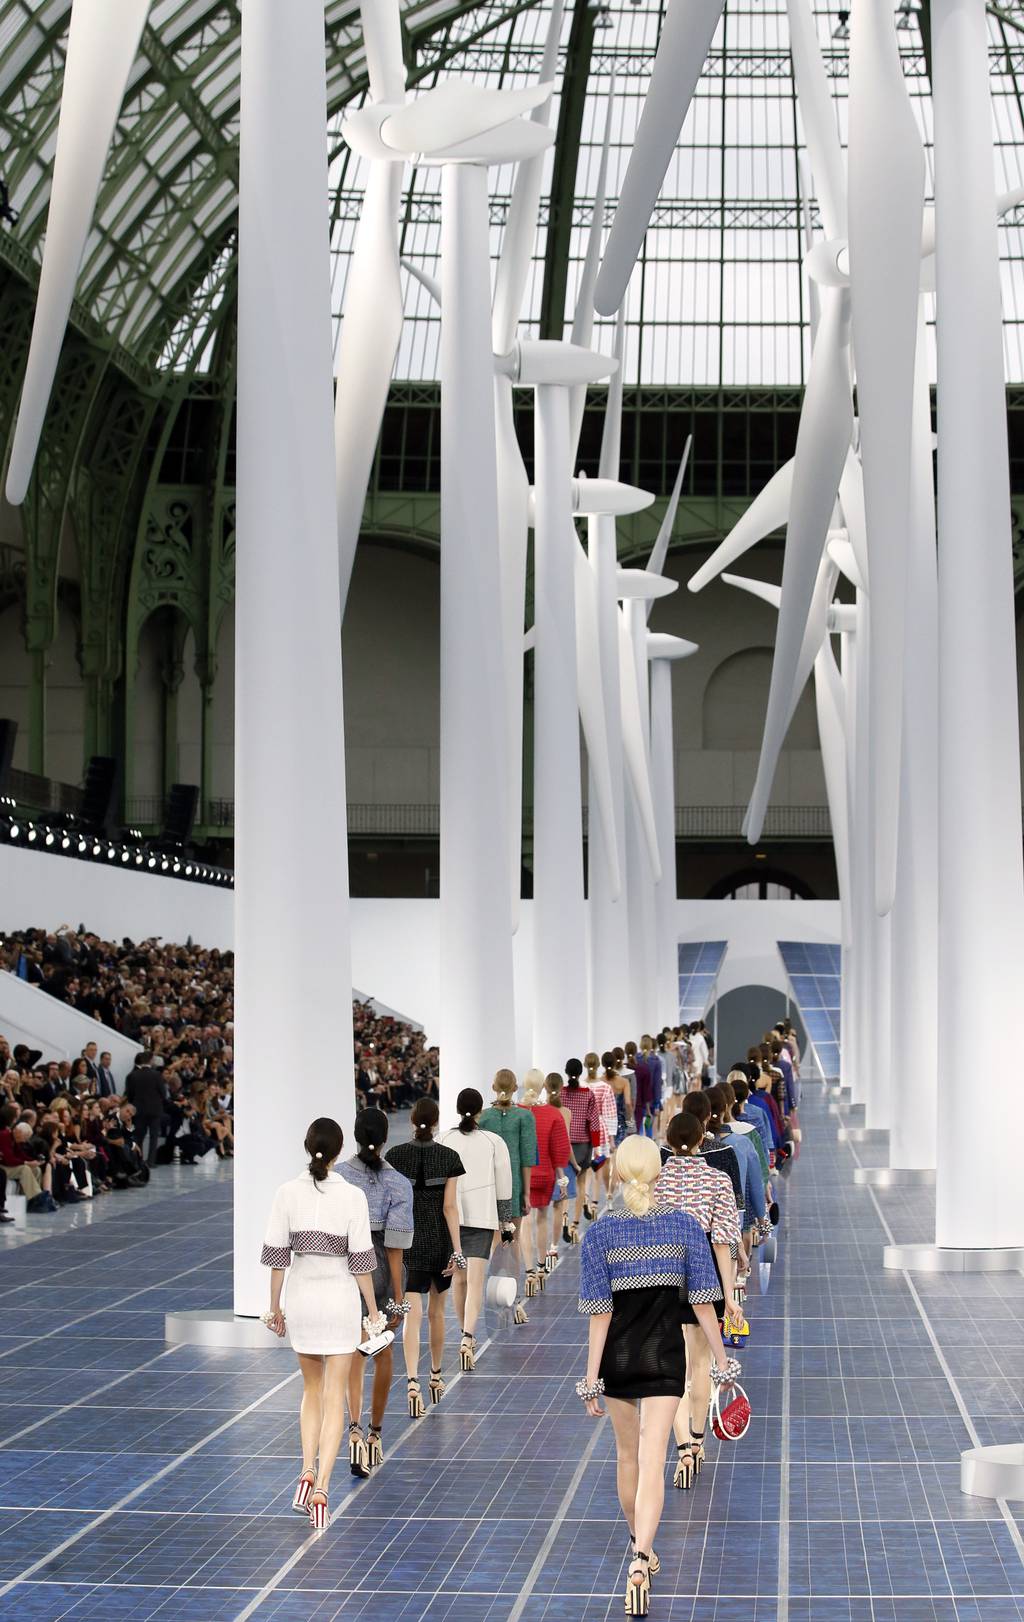 Models walk a Chanel catwalk paved with solar panels and framed by wind turbines.